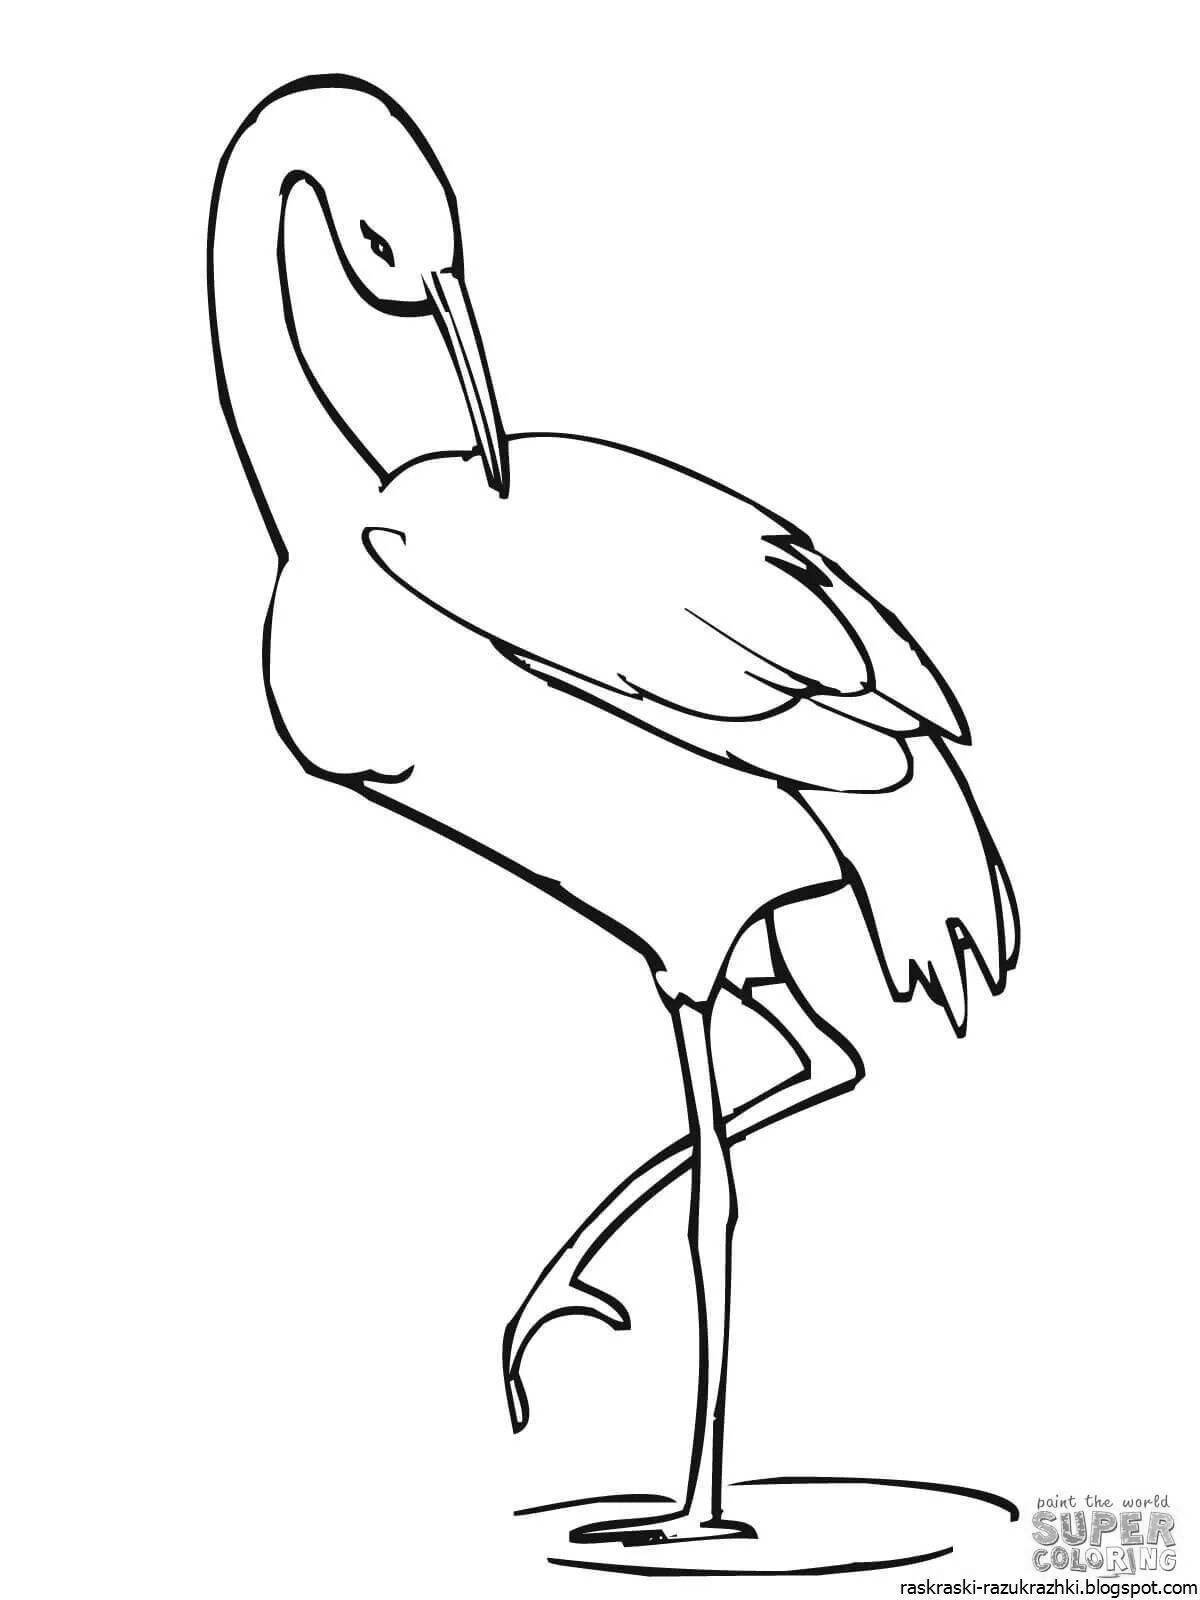 Playful Crane Coloring Page for Kids